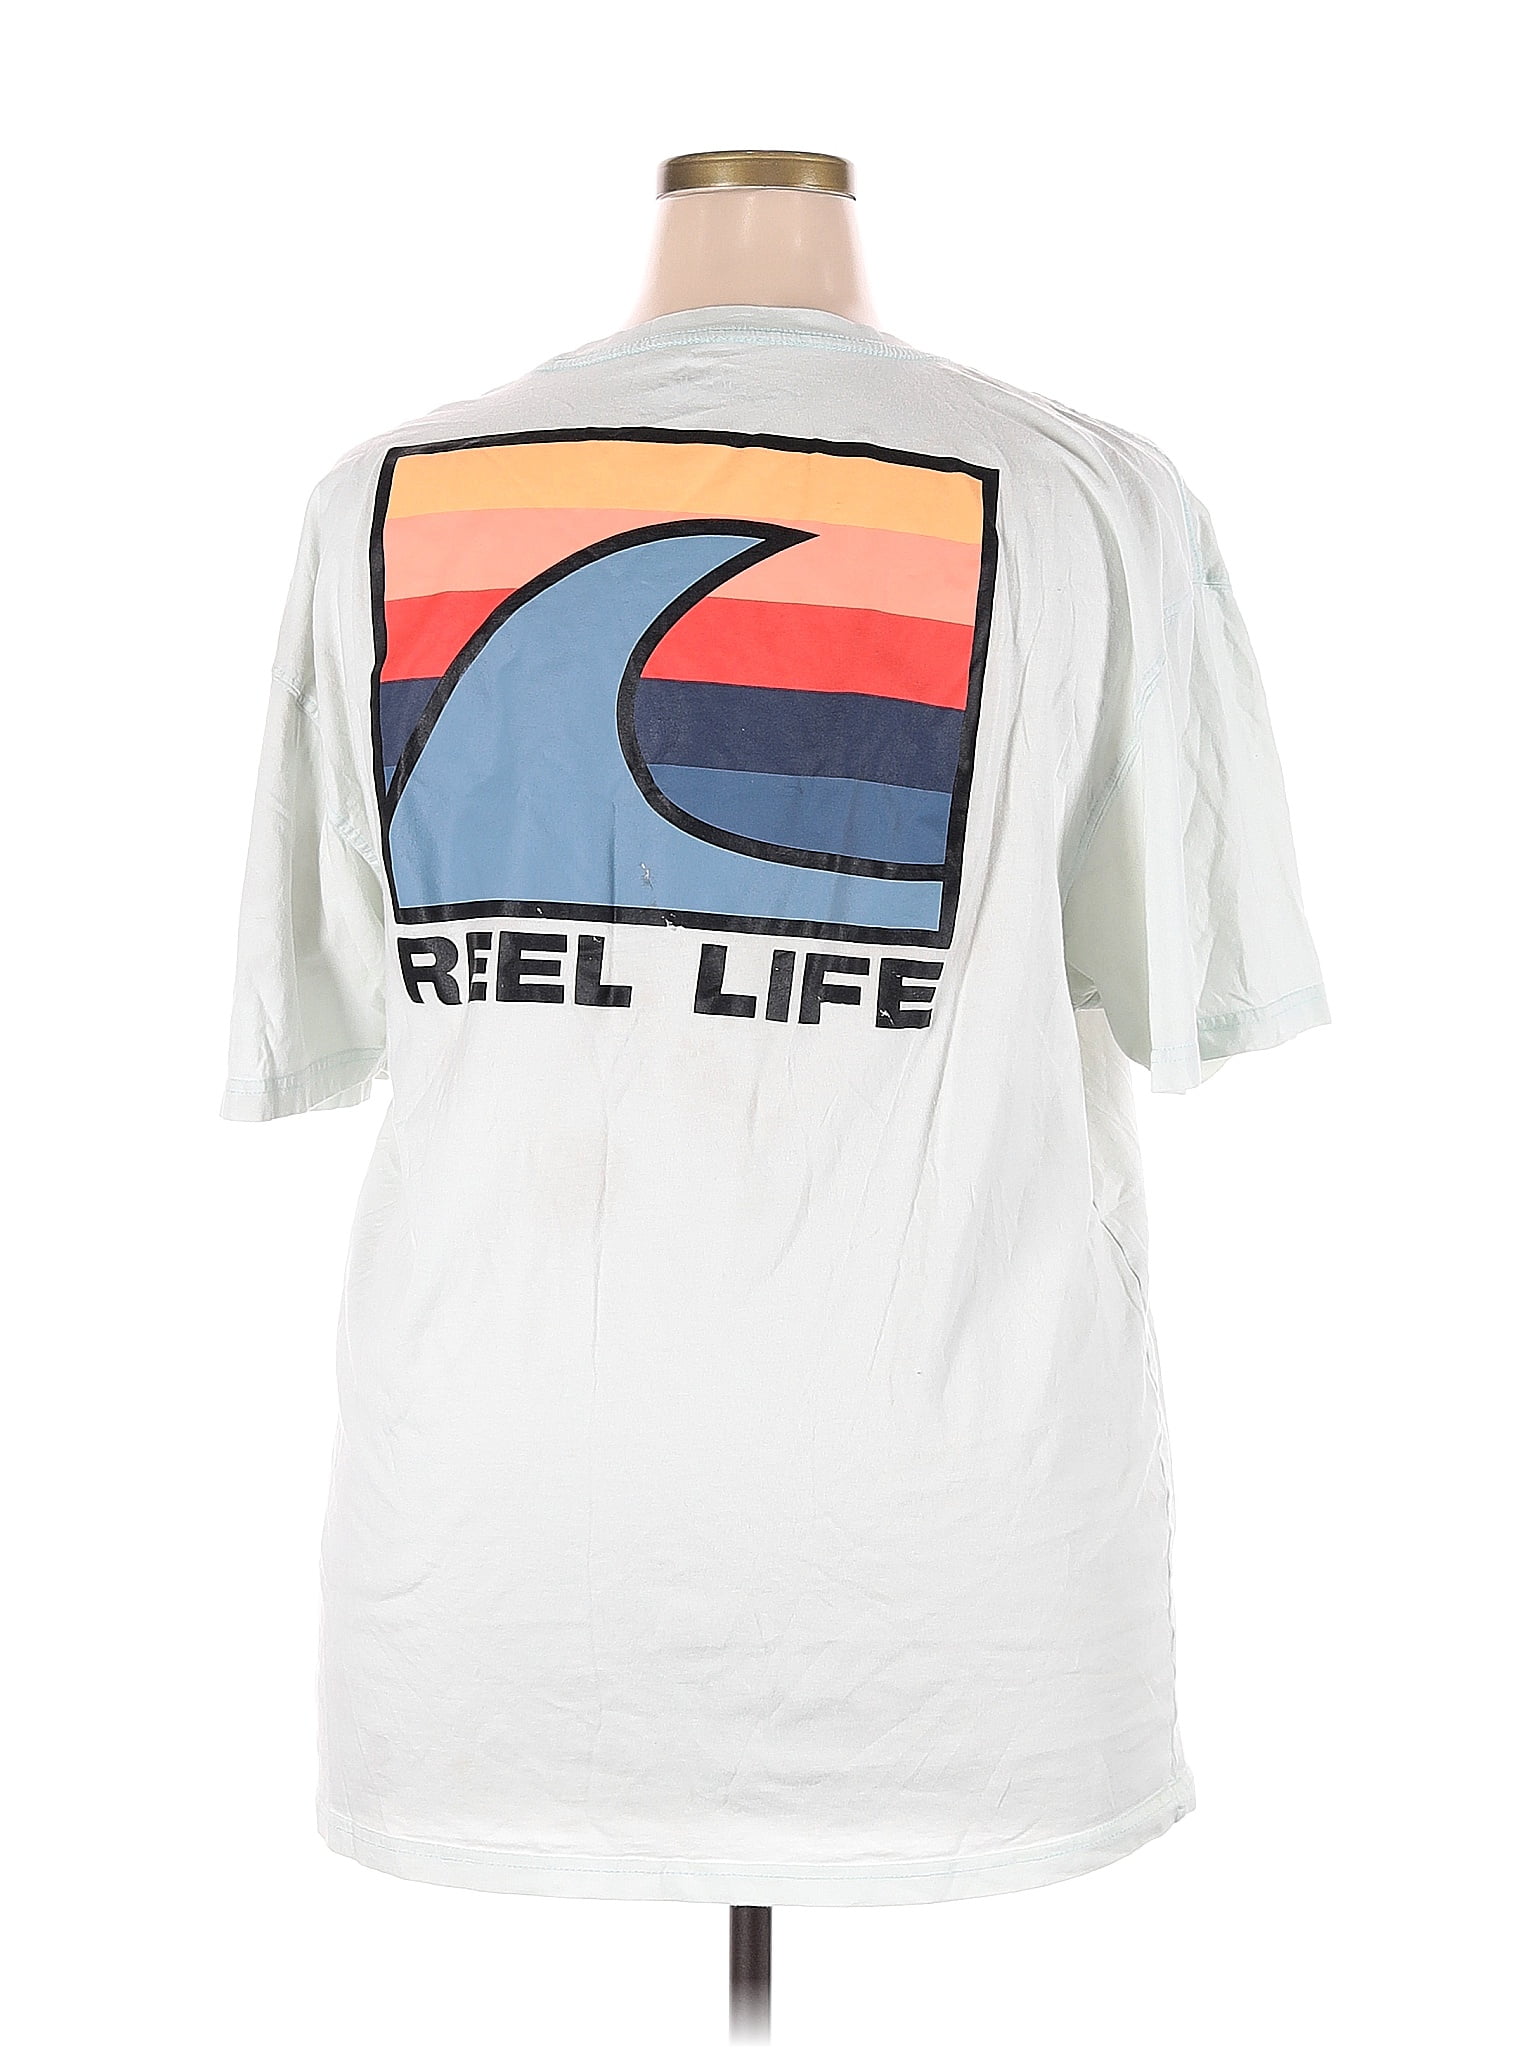 Reel Life Women's Clothing On Sale Up To 90% Off Retail